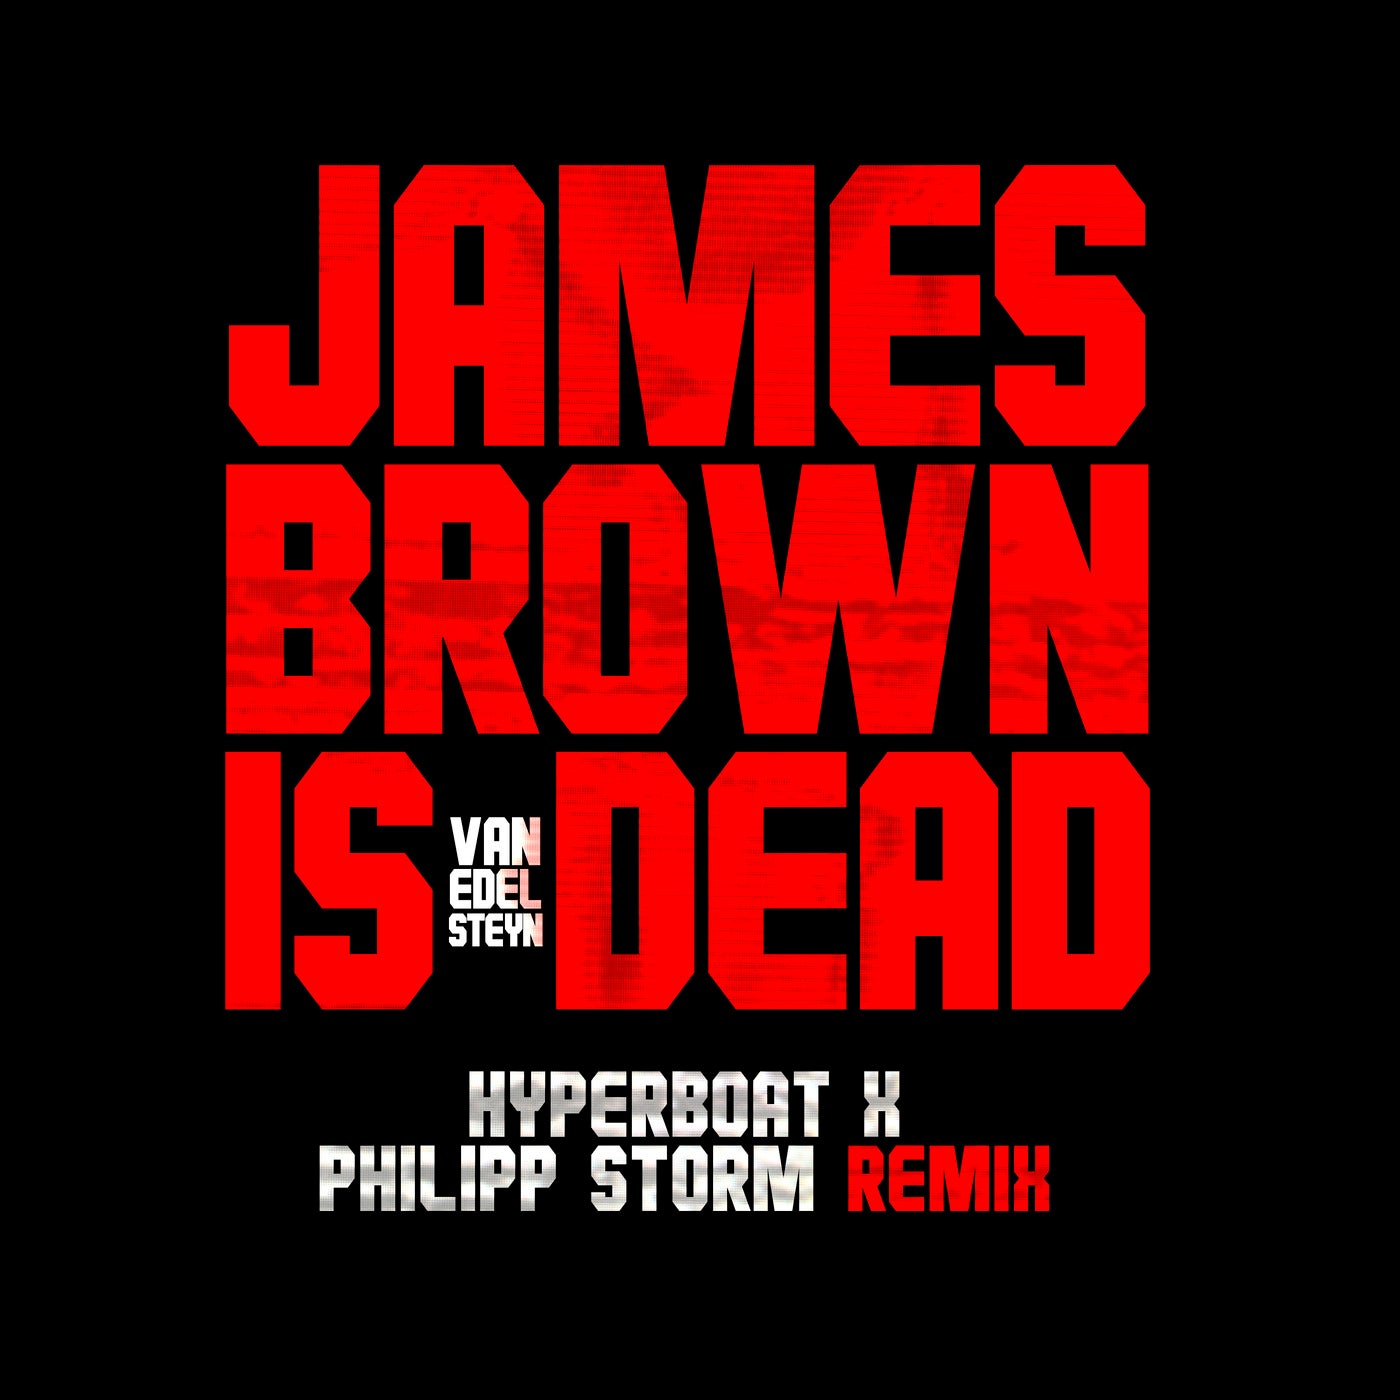 James Brown is Dead (HyperBoat X. Philipp Storm Extended Remix)